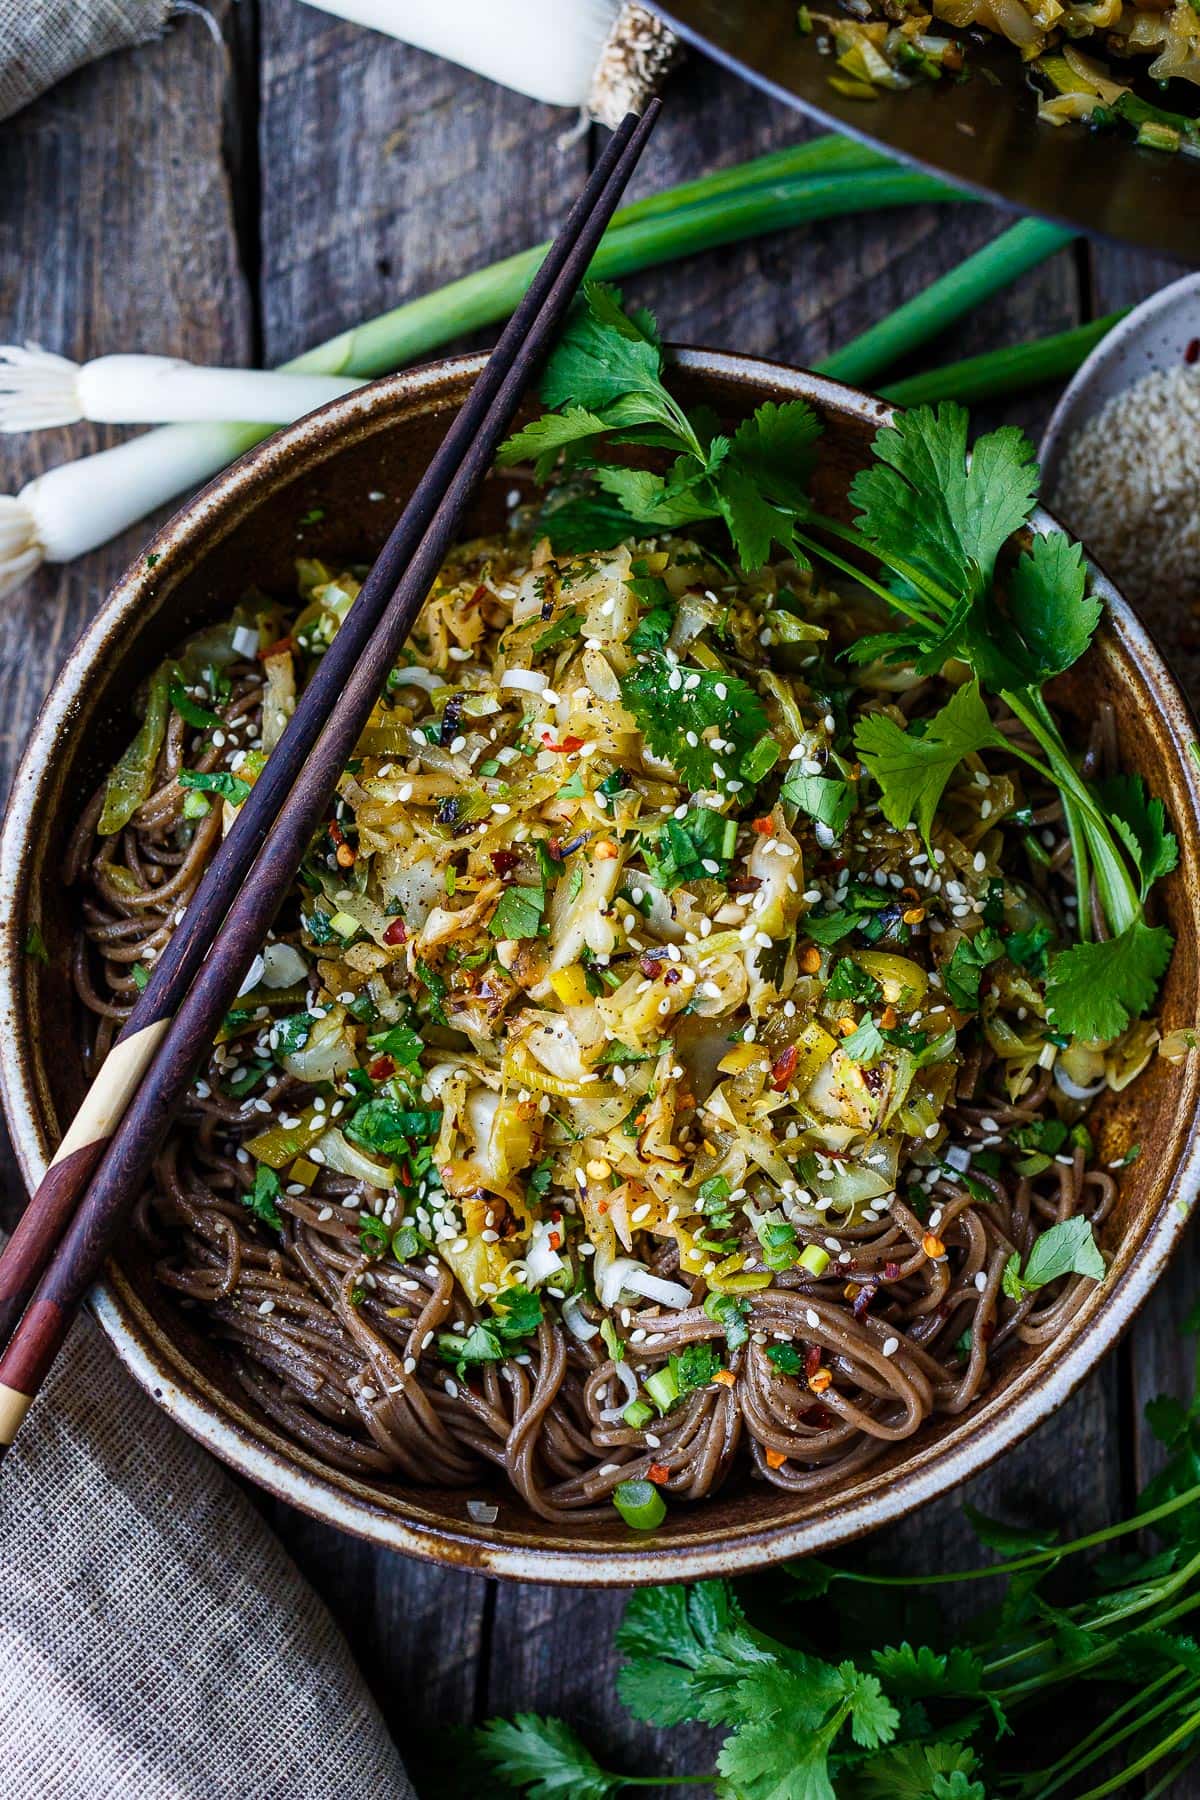 This quick and simple Cabbage Stir Fry is humble yet overflowing with savory flavor. Full of amazing health benefits, cabbage takes center stage here transforming into a luscious side dish or perfect topping for rice or buckwheat soba noodles. Ready to serve in about 30 minutes!